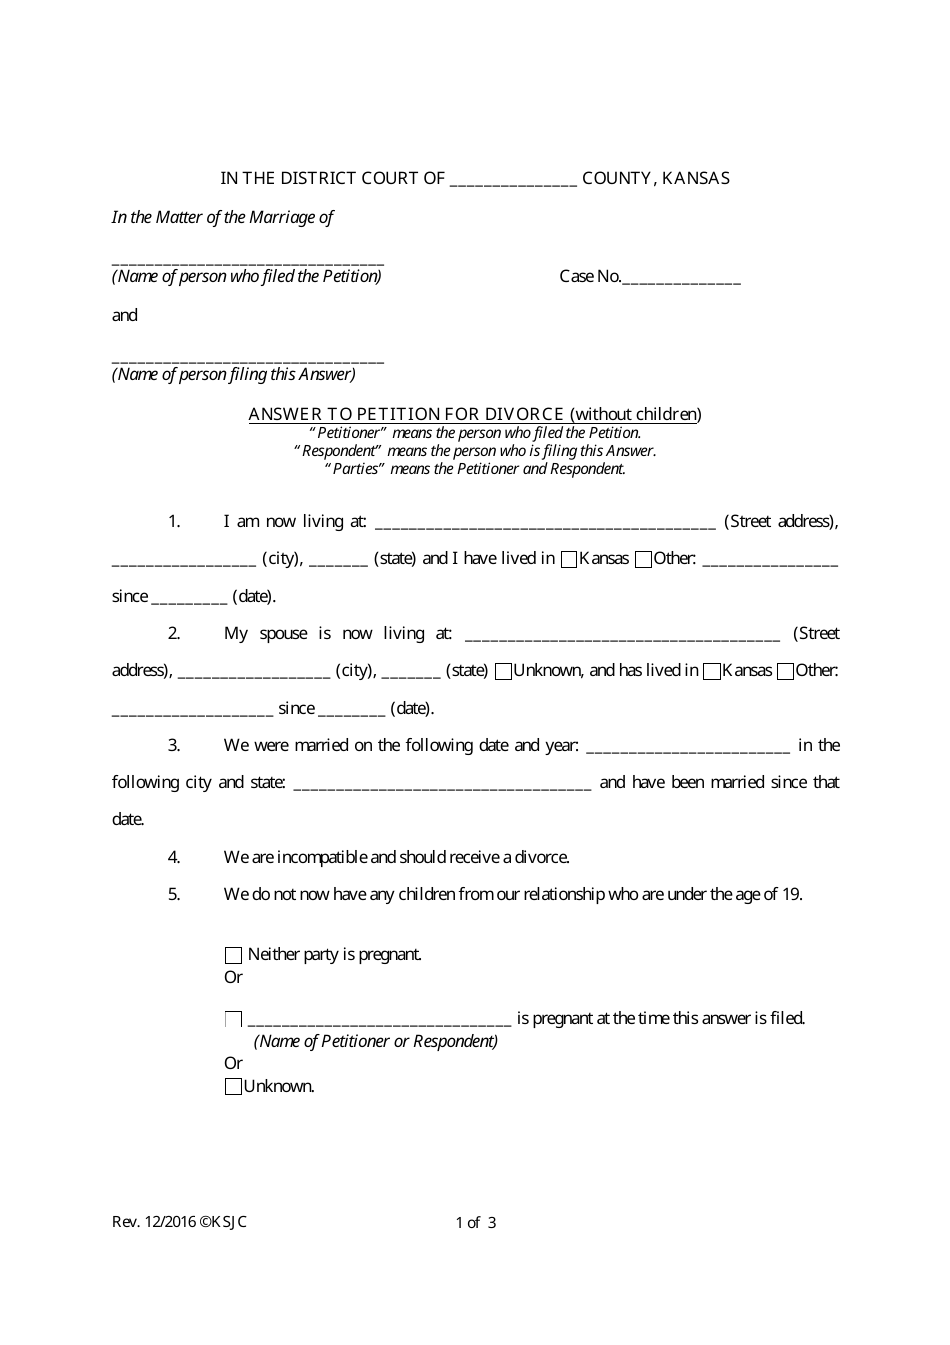 Answer to Petition for Divorce (Without Children) - Kansas, Page 1